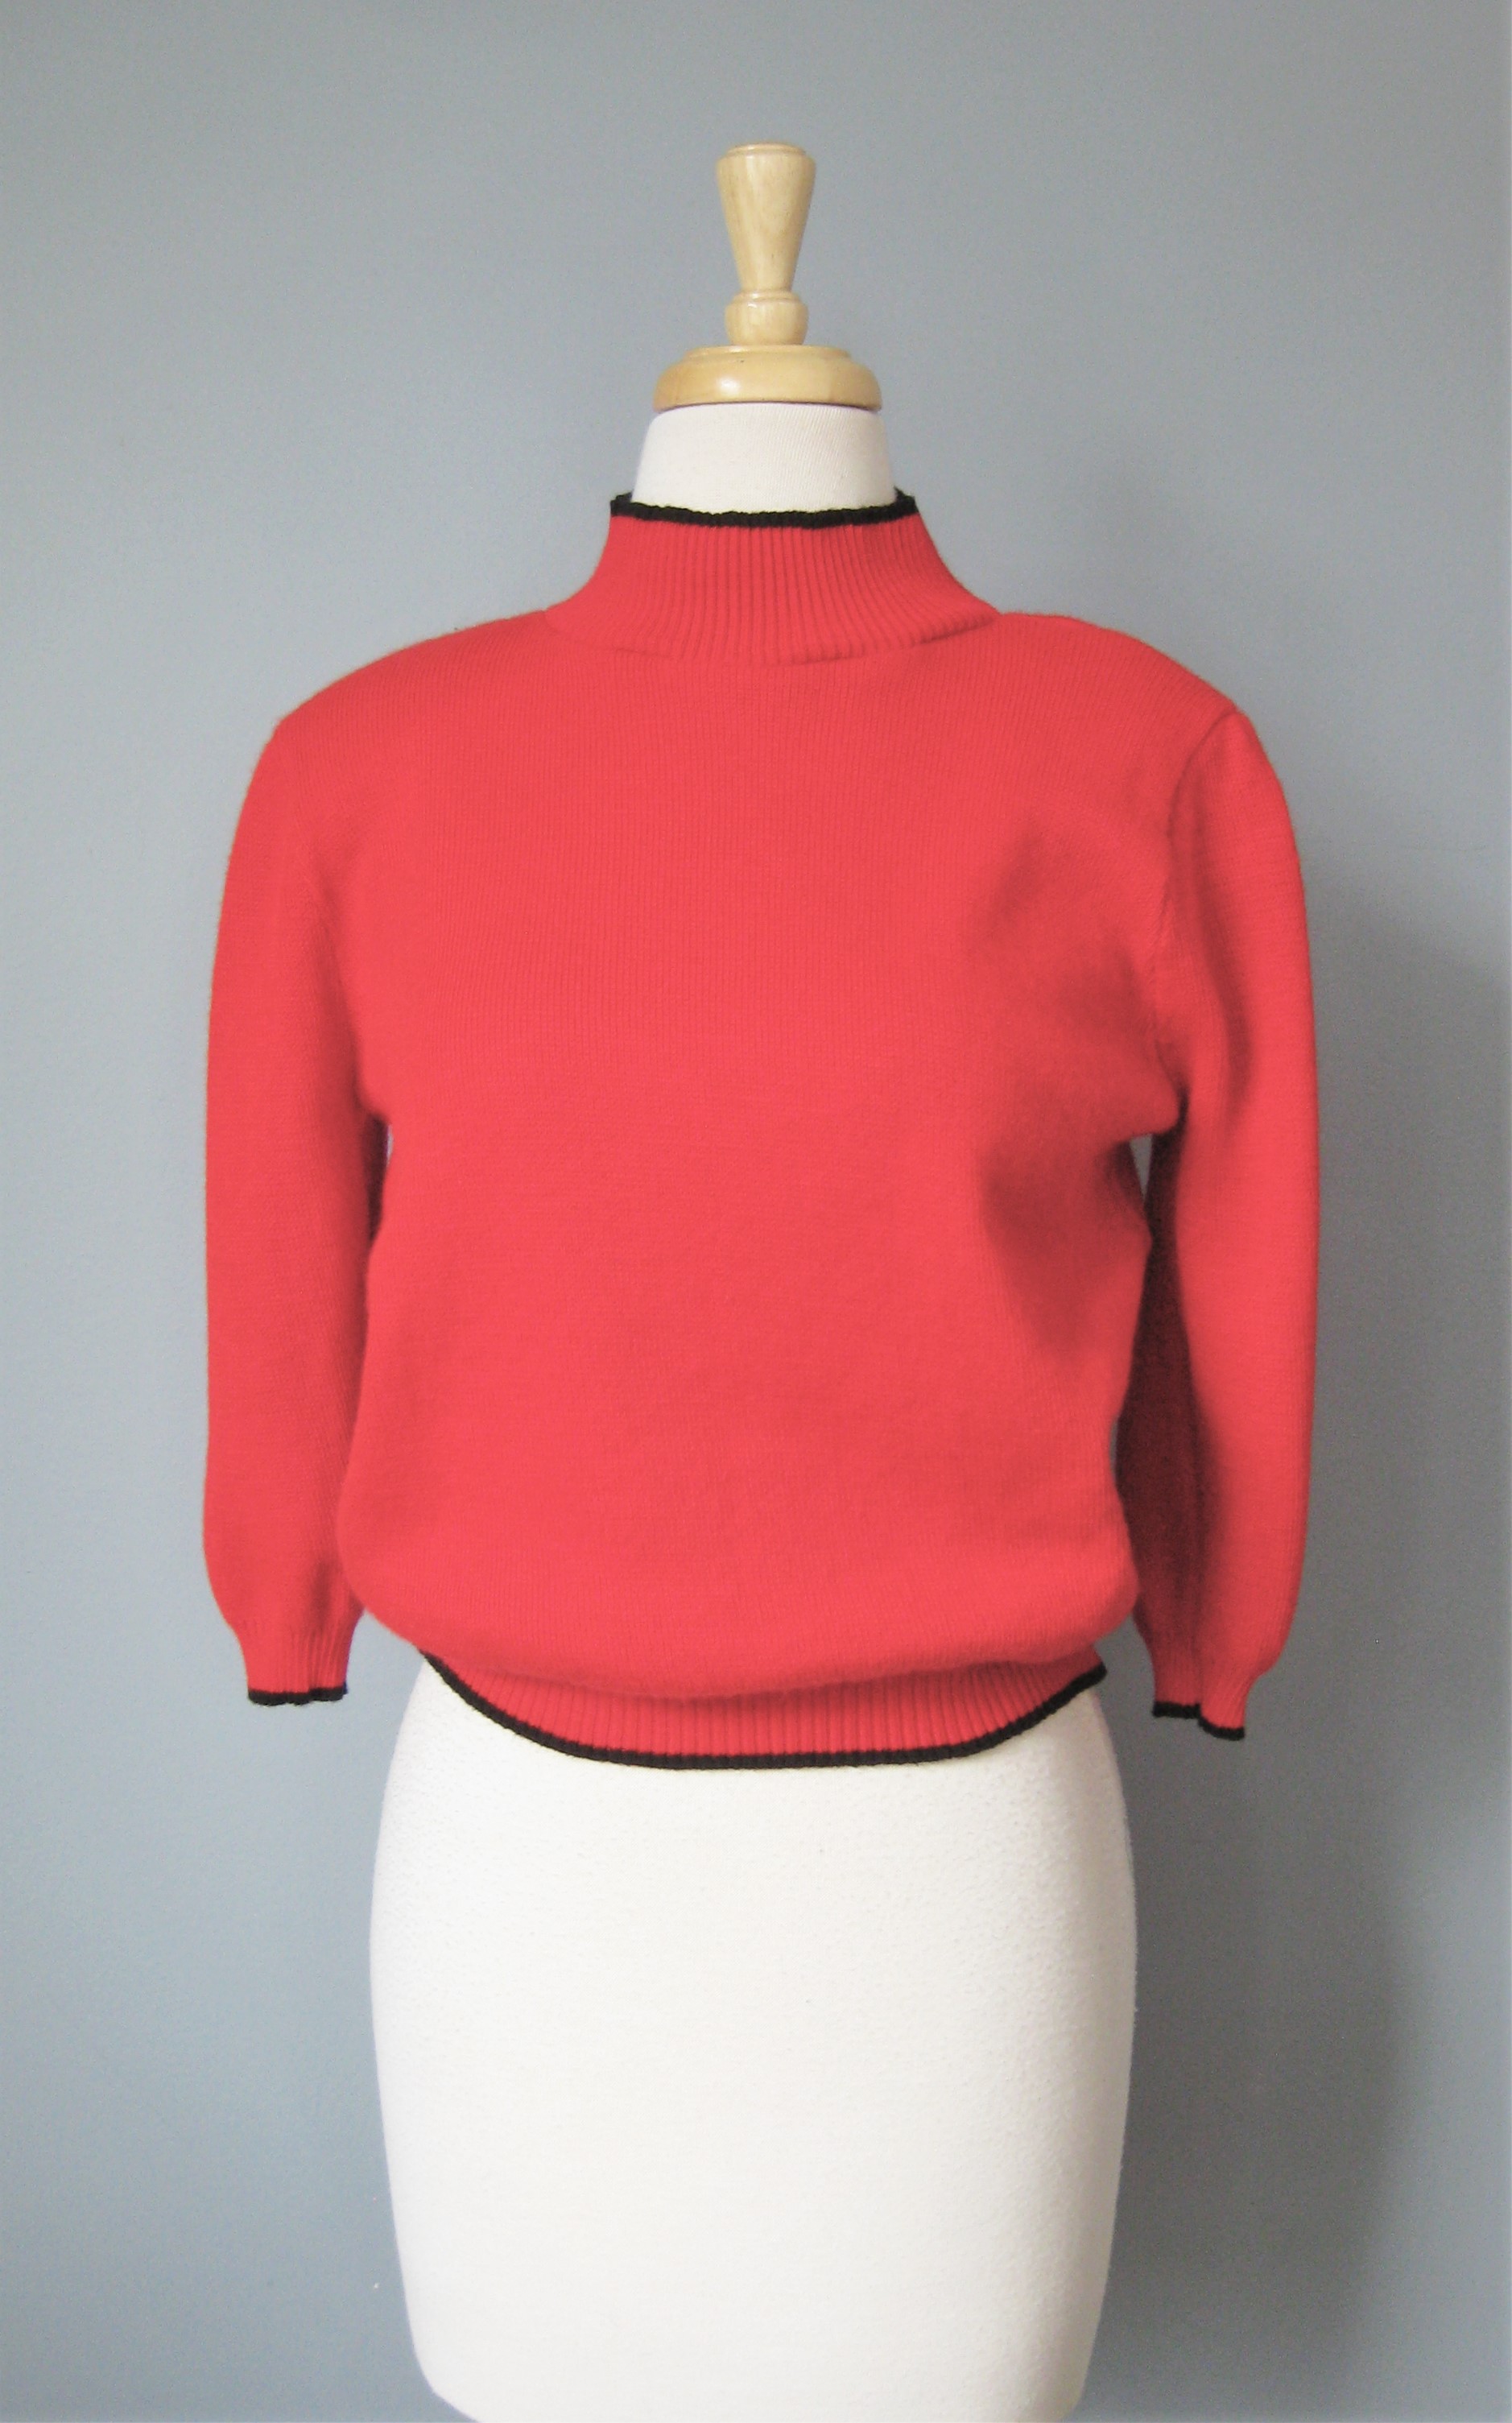 Vtg SS Mock Tneck, Red, Size: Large
Cute little cropped sweater in bright red with black contrast trim at the hem and ends of the short sleeves.
Big shoulder pads.
No tags, but I believe made of acrylic.
Cropped and super with high waisted pants

Here are the flat measurements, please double where appropriate:
Shoulder to shoulder: 15.5
Armpit to armpit: 19 1/2
Width at hem: 12 stretches comfortably to 14
Overall length: 19.5

Thanks for looking.
#41300